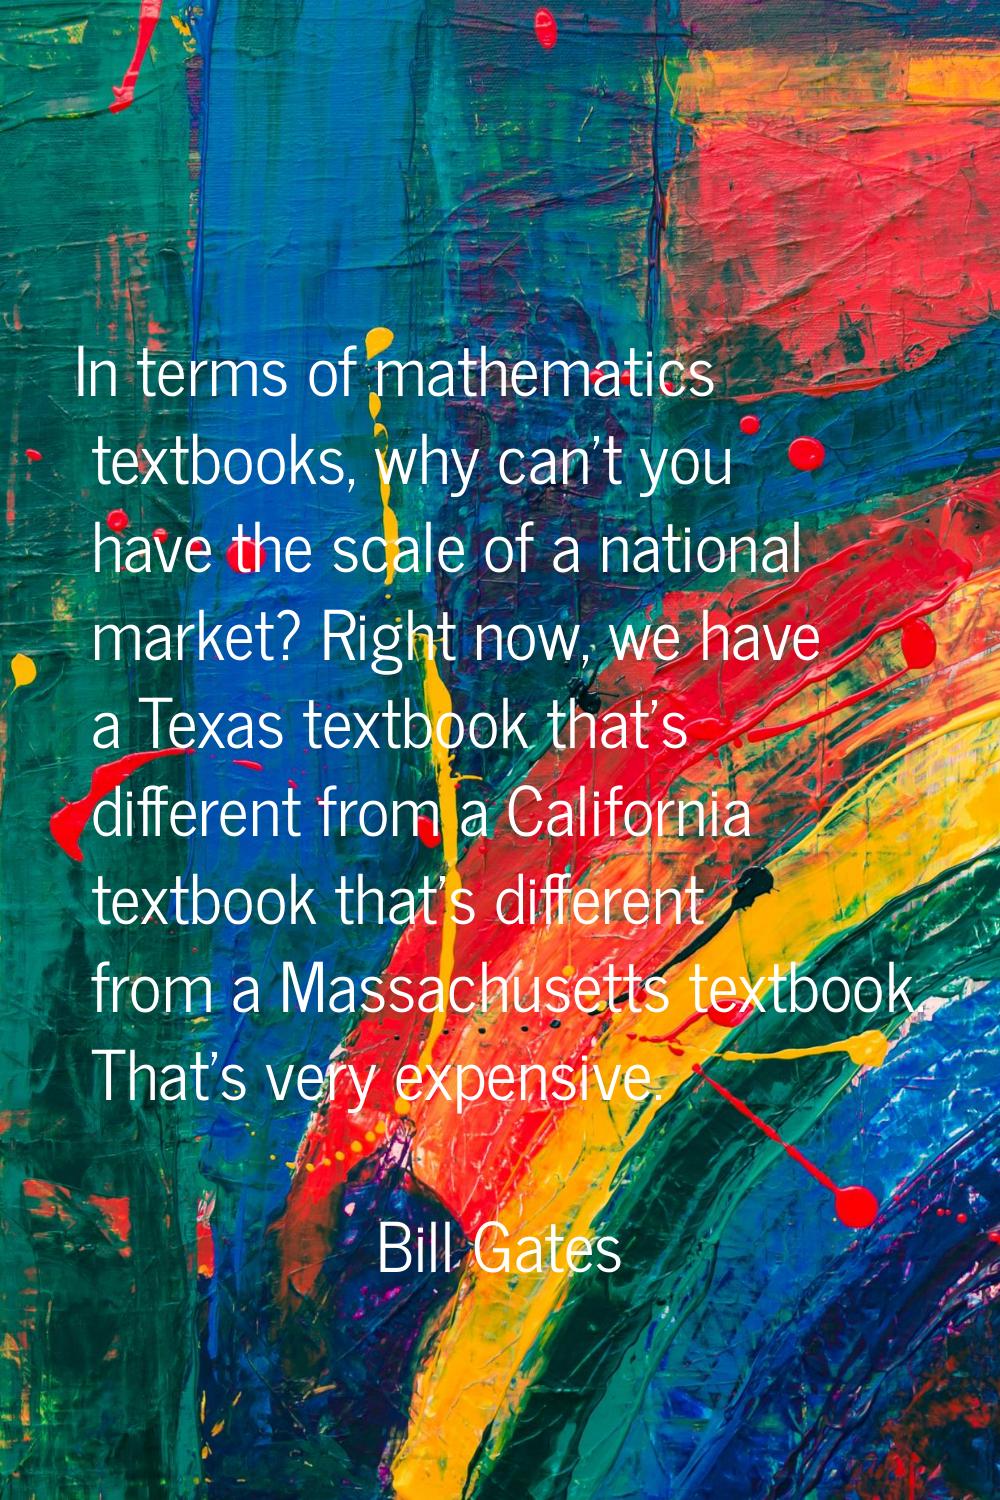 In terms of mathematics textbooks, why can't you have the scale of a national market? Right now, we